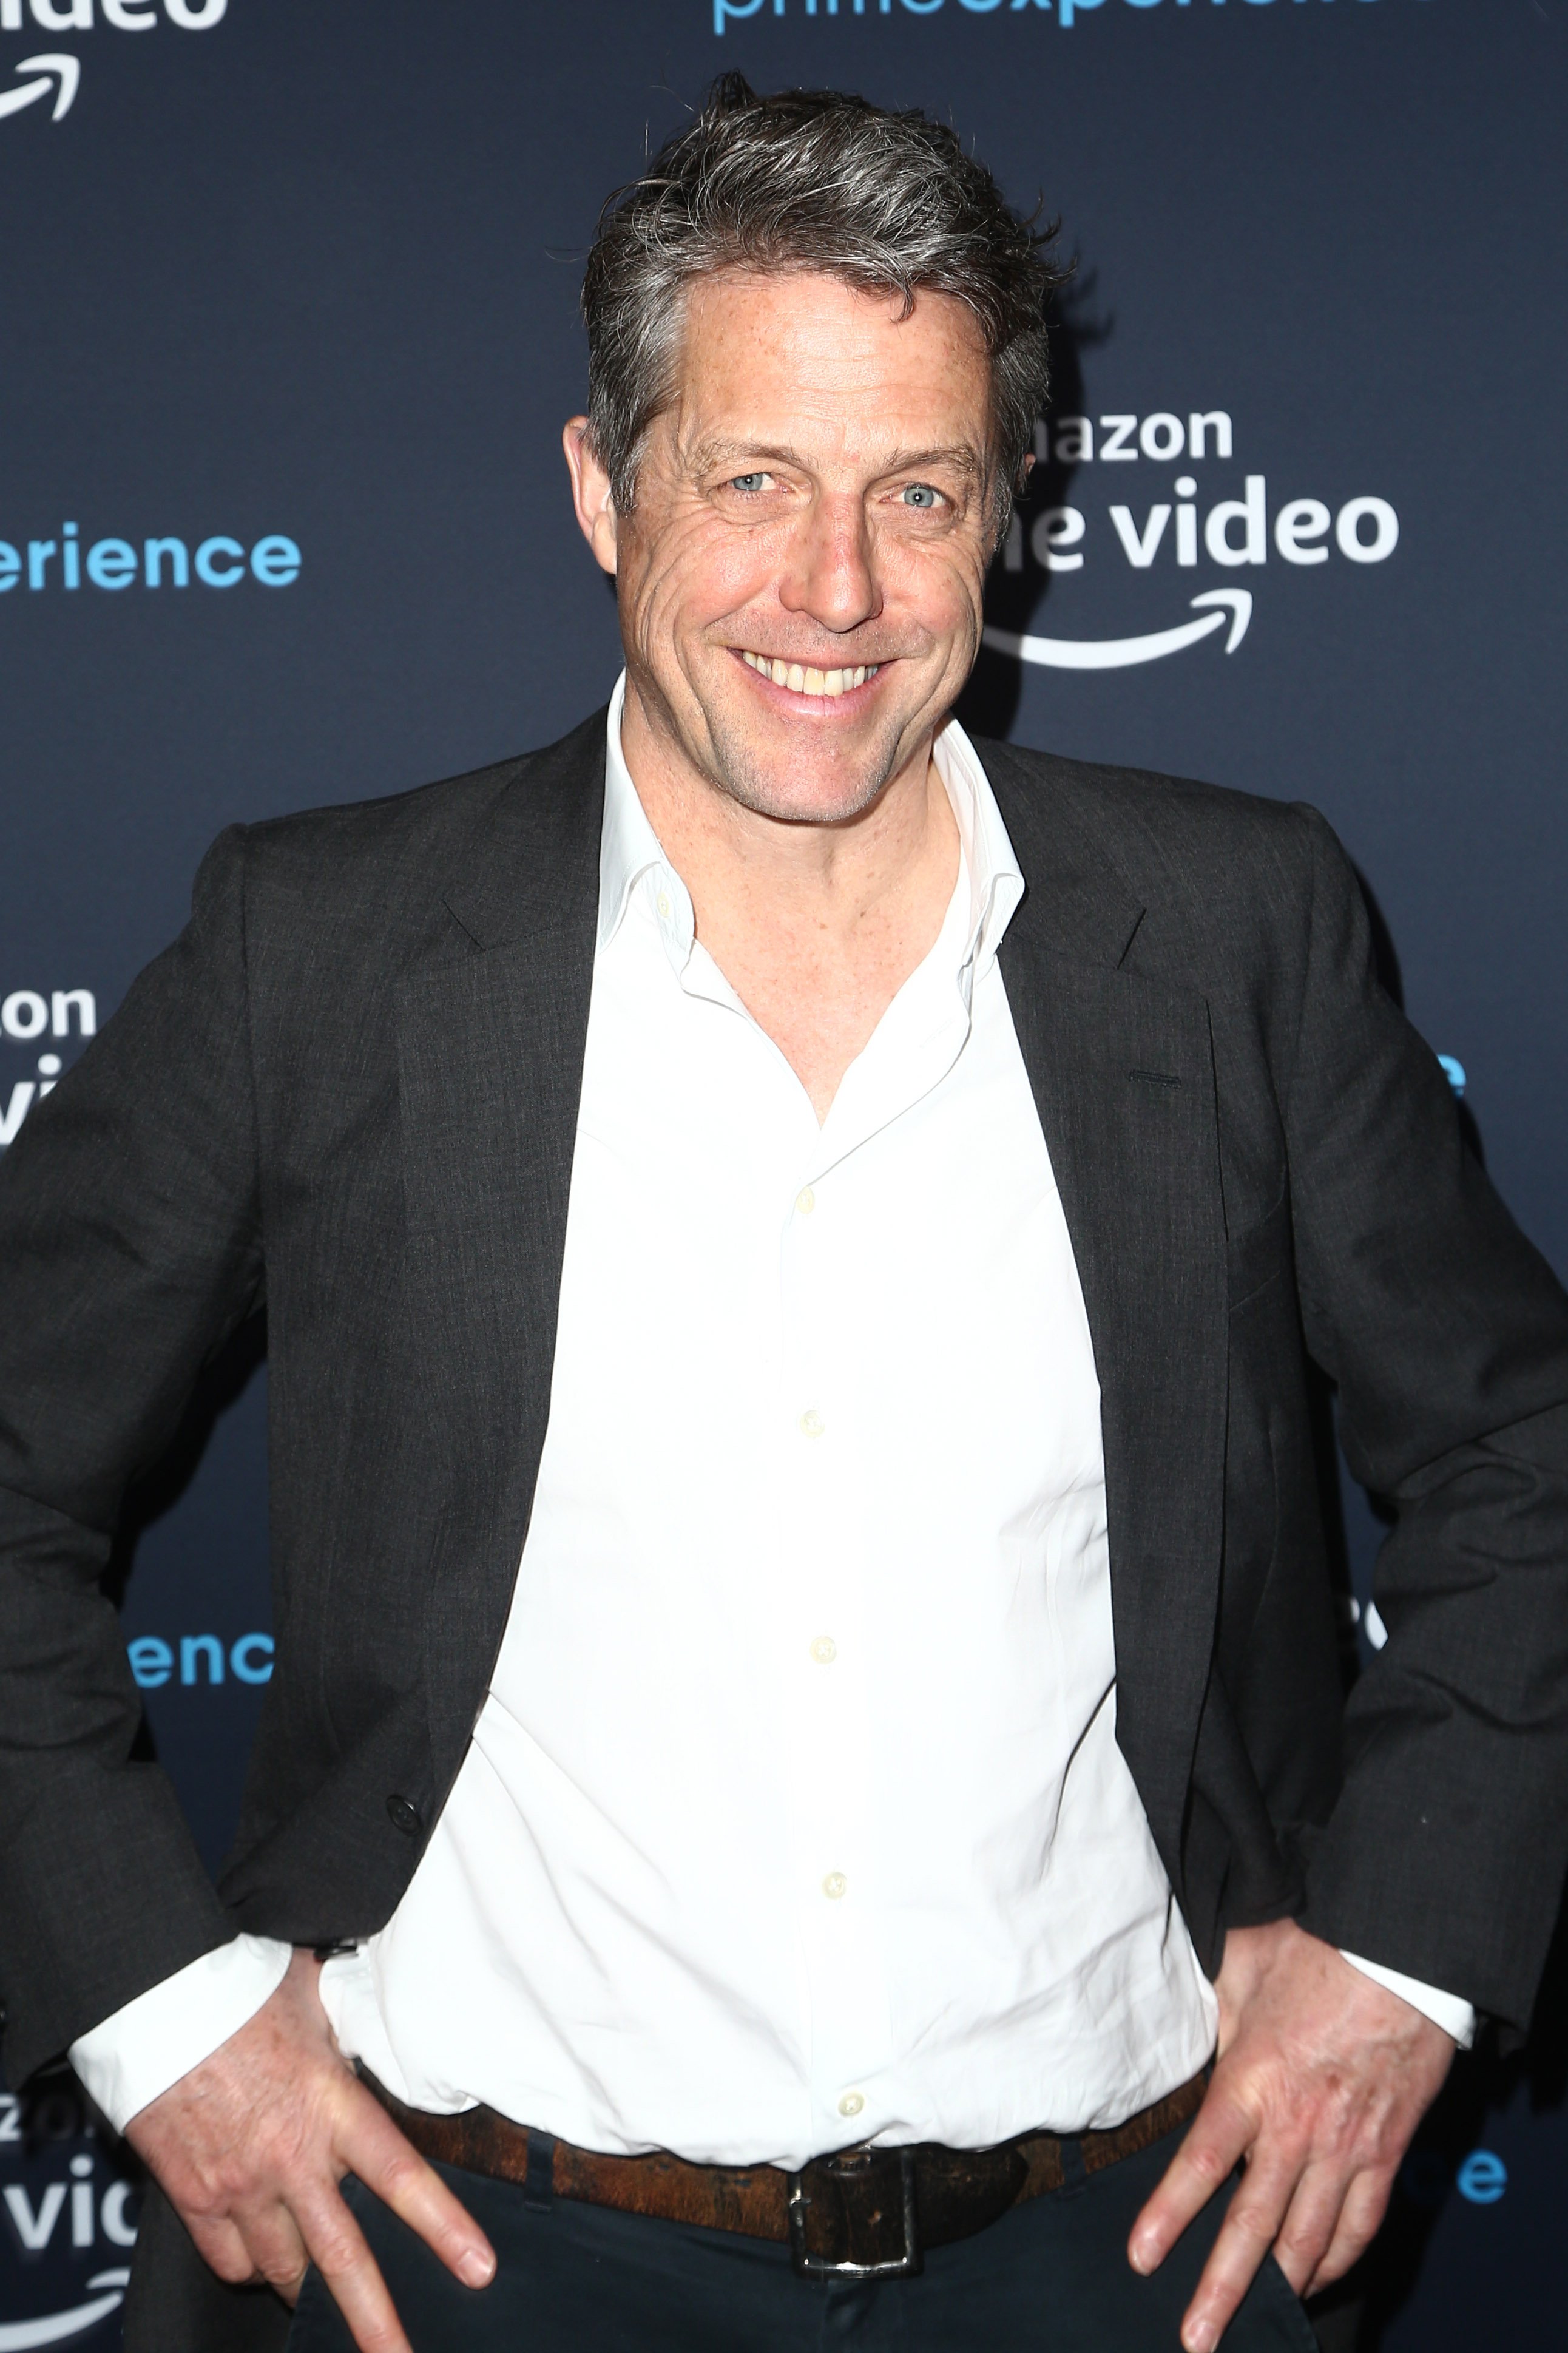 Hugh Grant attends the Amazon Prime Experience Hosts "A Very English Scandal" FYC Screening And Panel at Hollywood Athletic Club on April 28, 2019, in Hollywood, California | Photo: Getty Images.